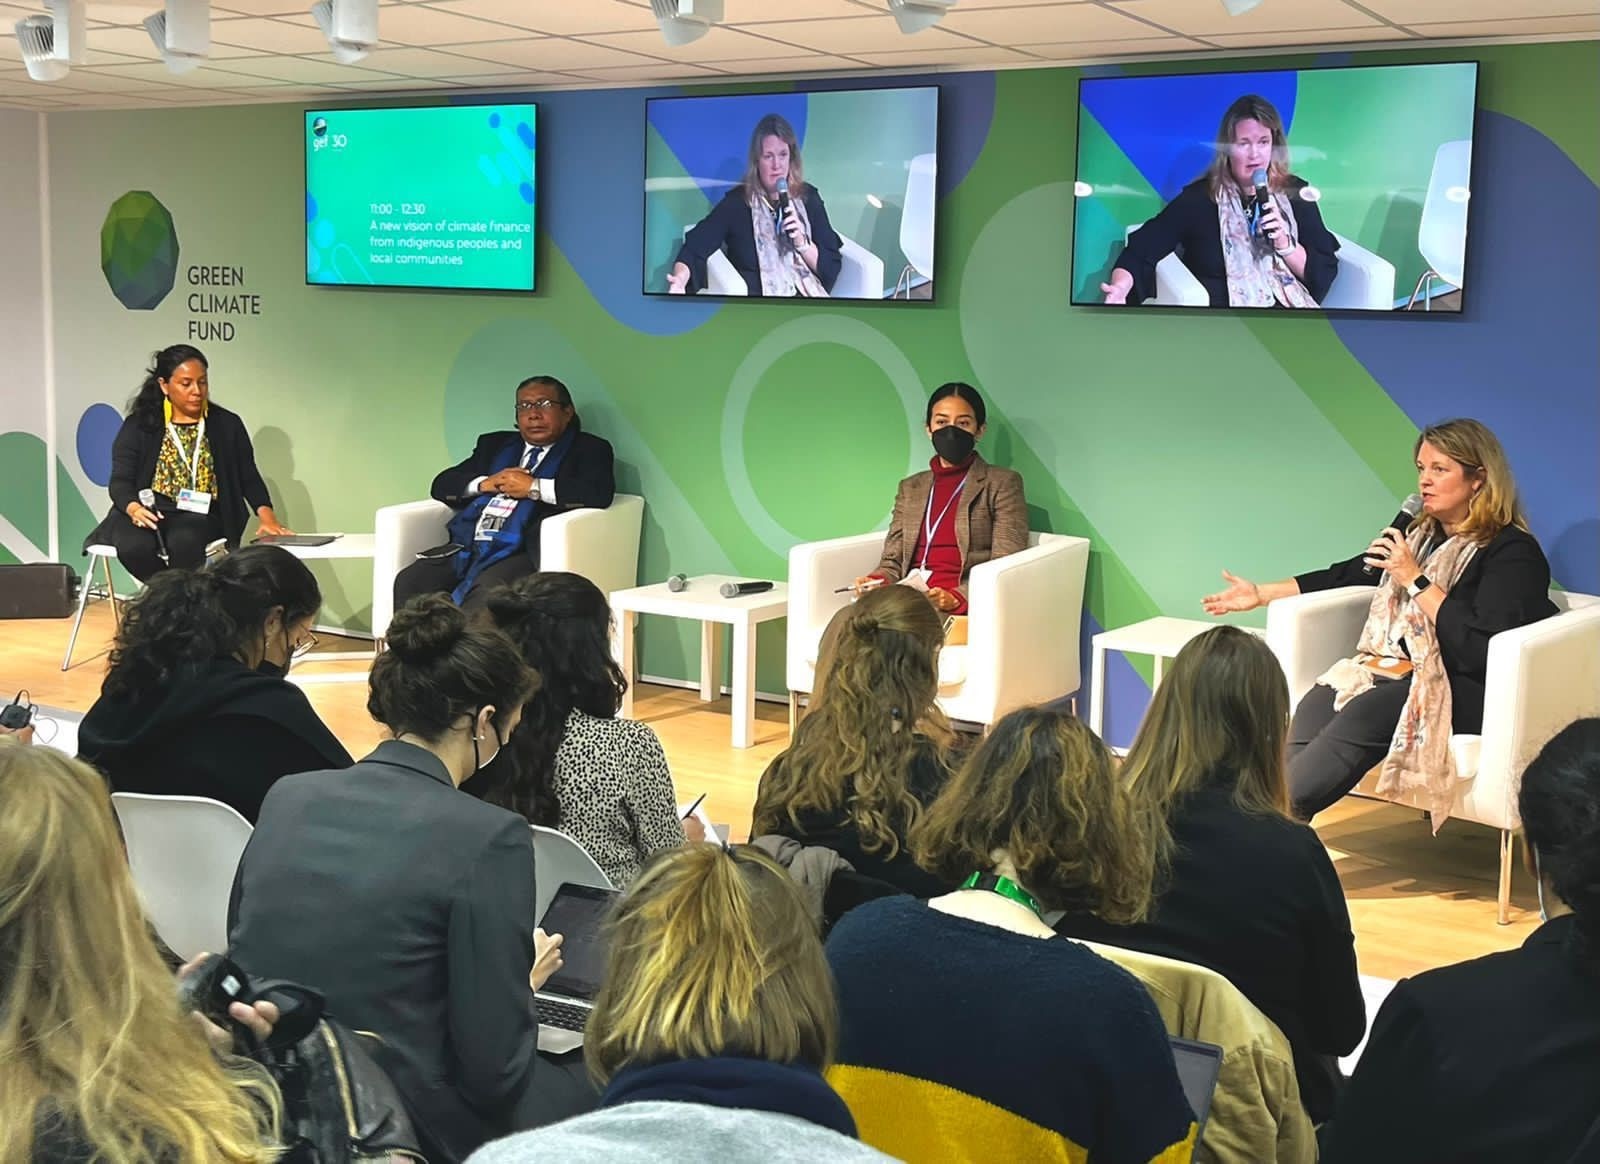 a new vision of climate finance from indigenous peoples and local communities’. - at COP26